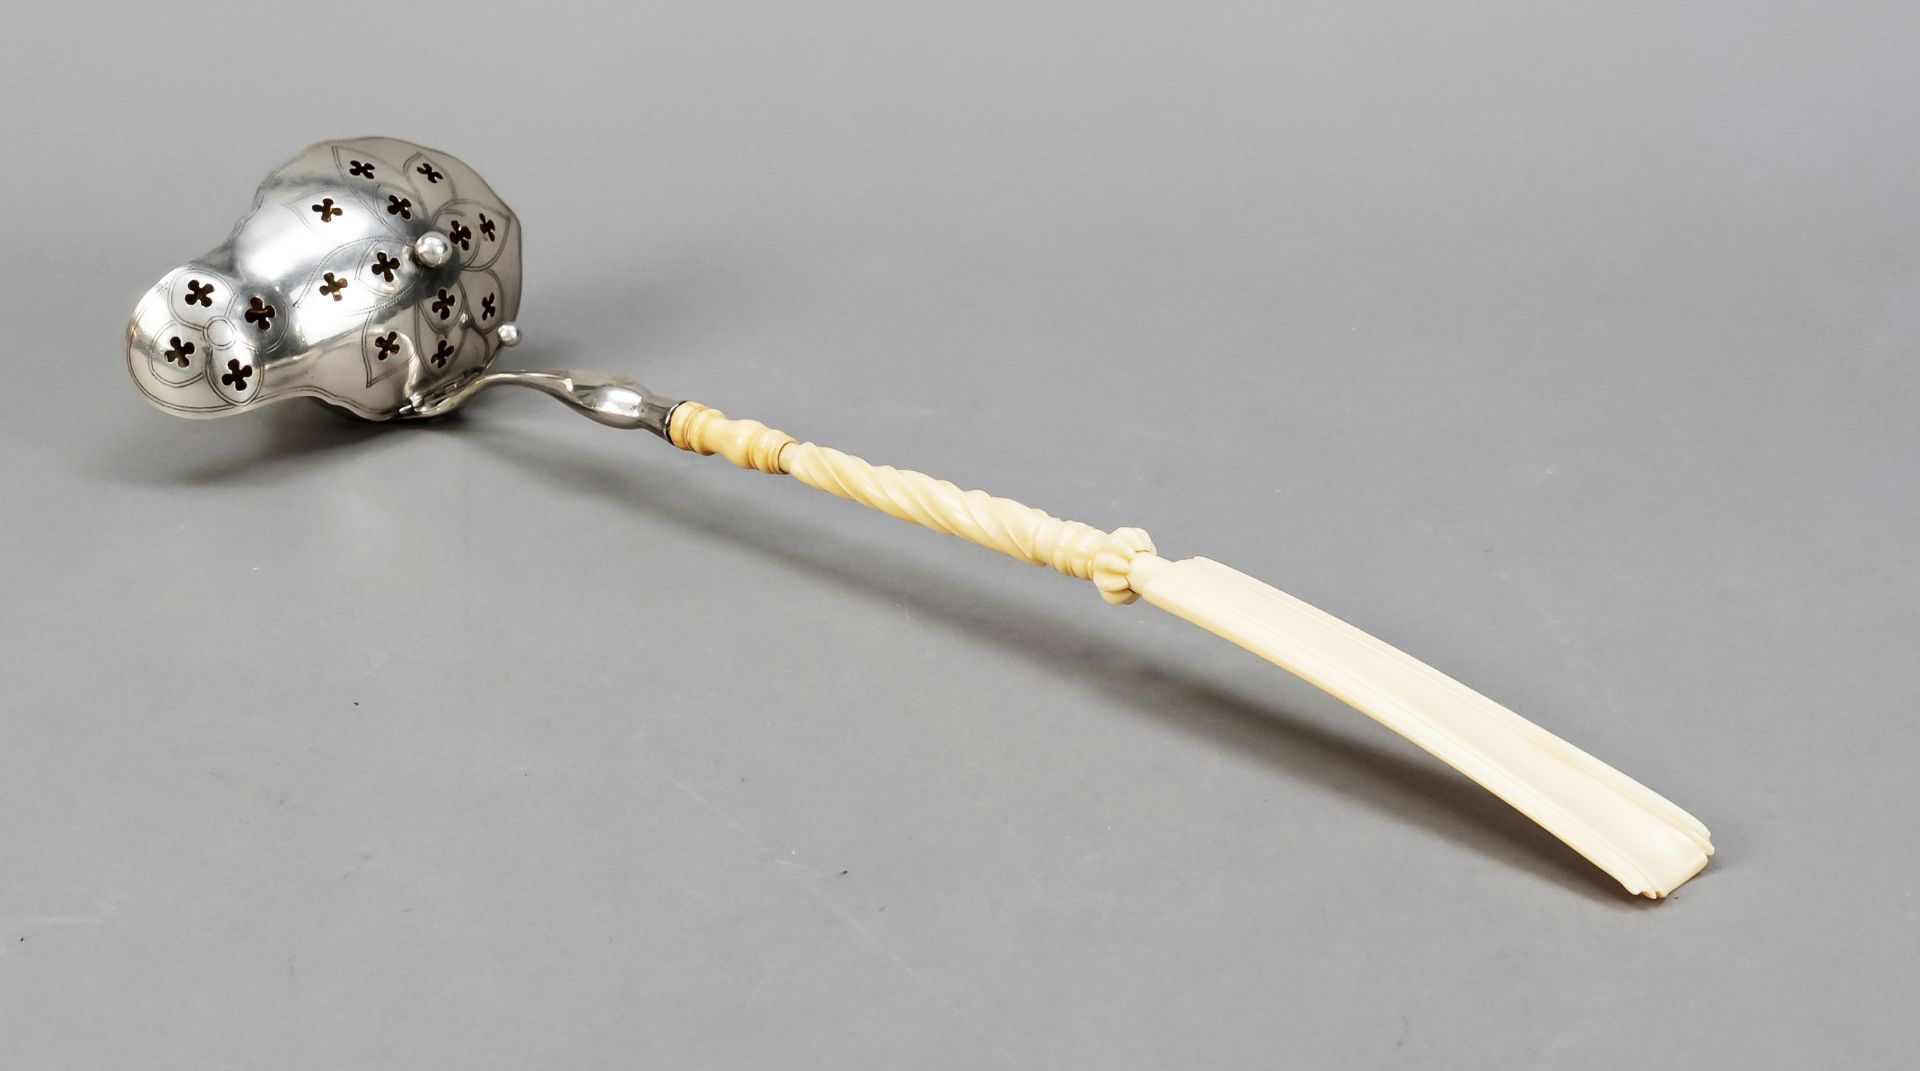 Punch ladle, c. 1900, silver tested, gilt interior, of curved form, ladle with hinged lid, open-